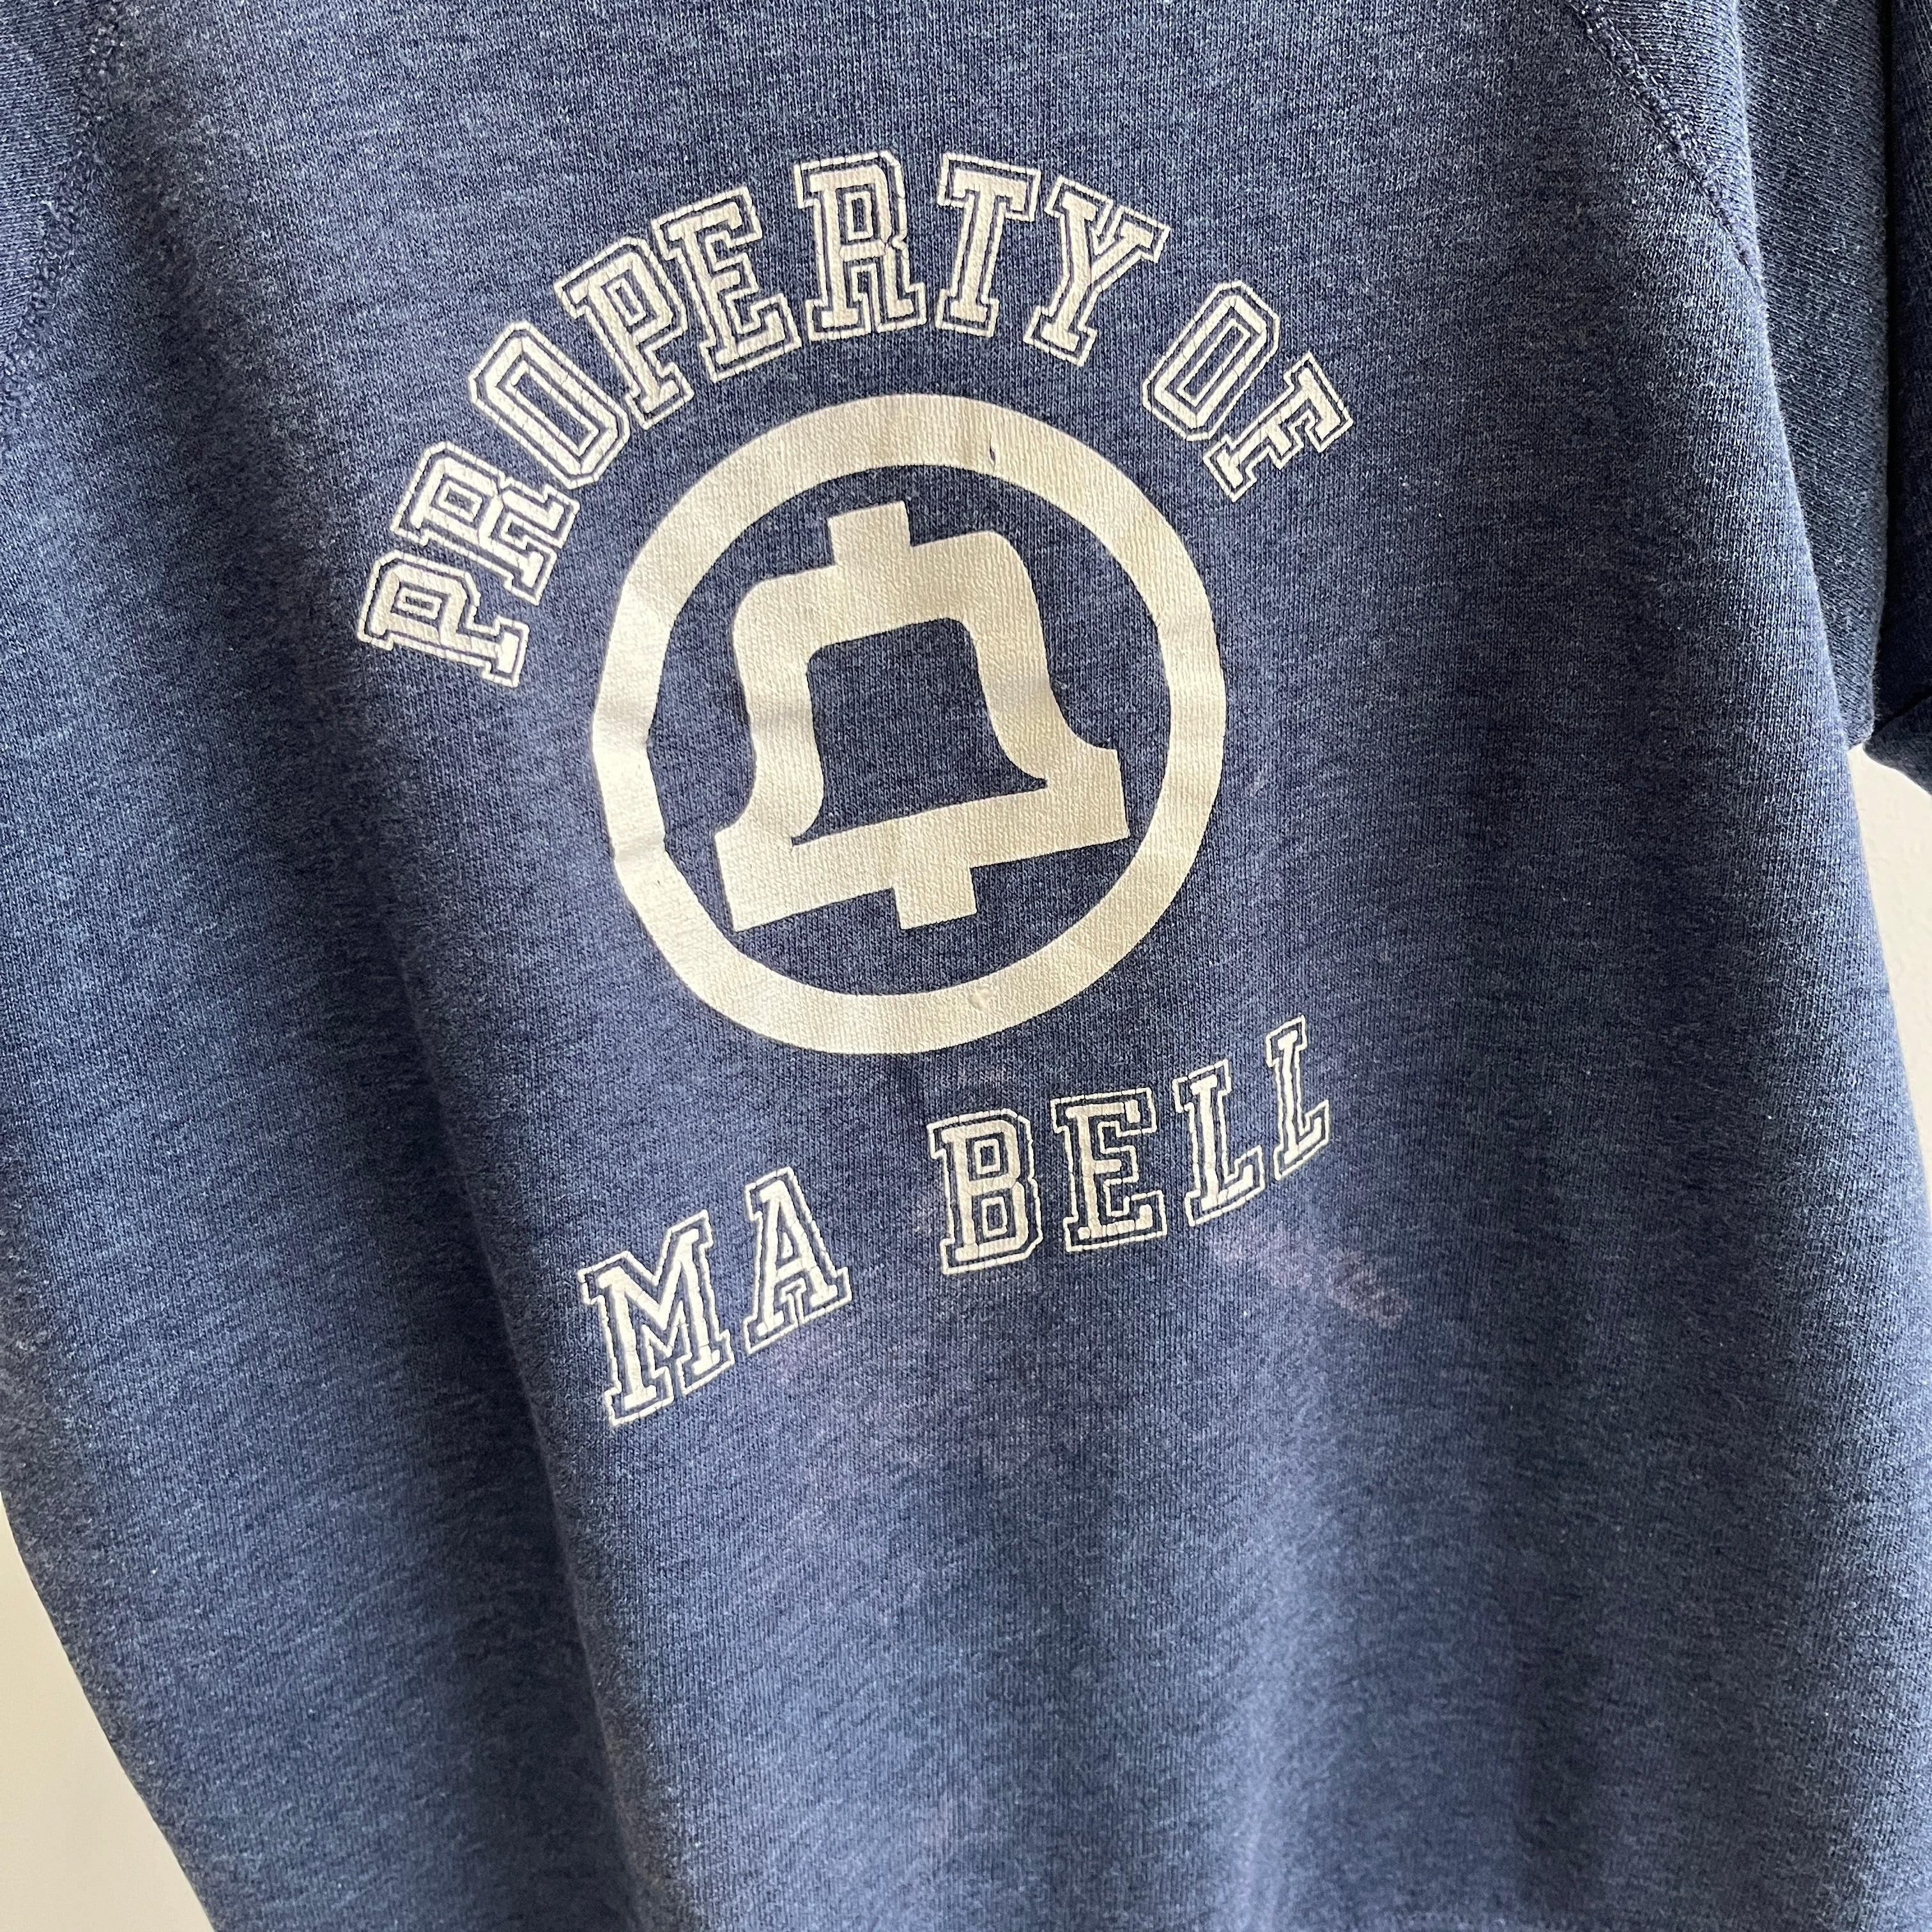 1970s Property of MA Bell Warm Up - WOW